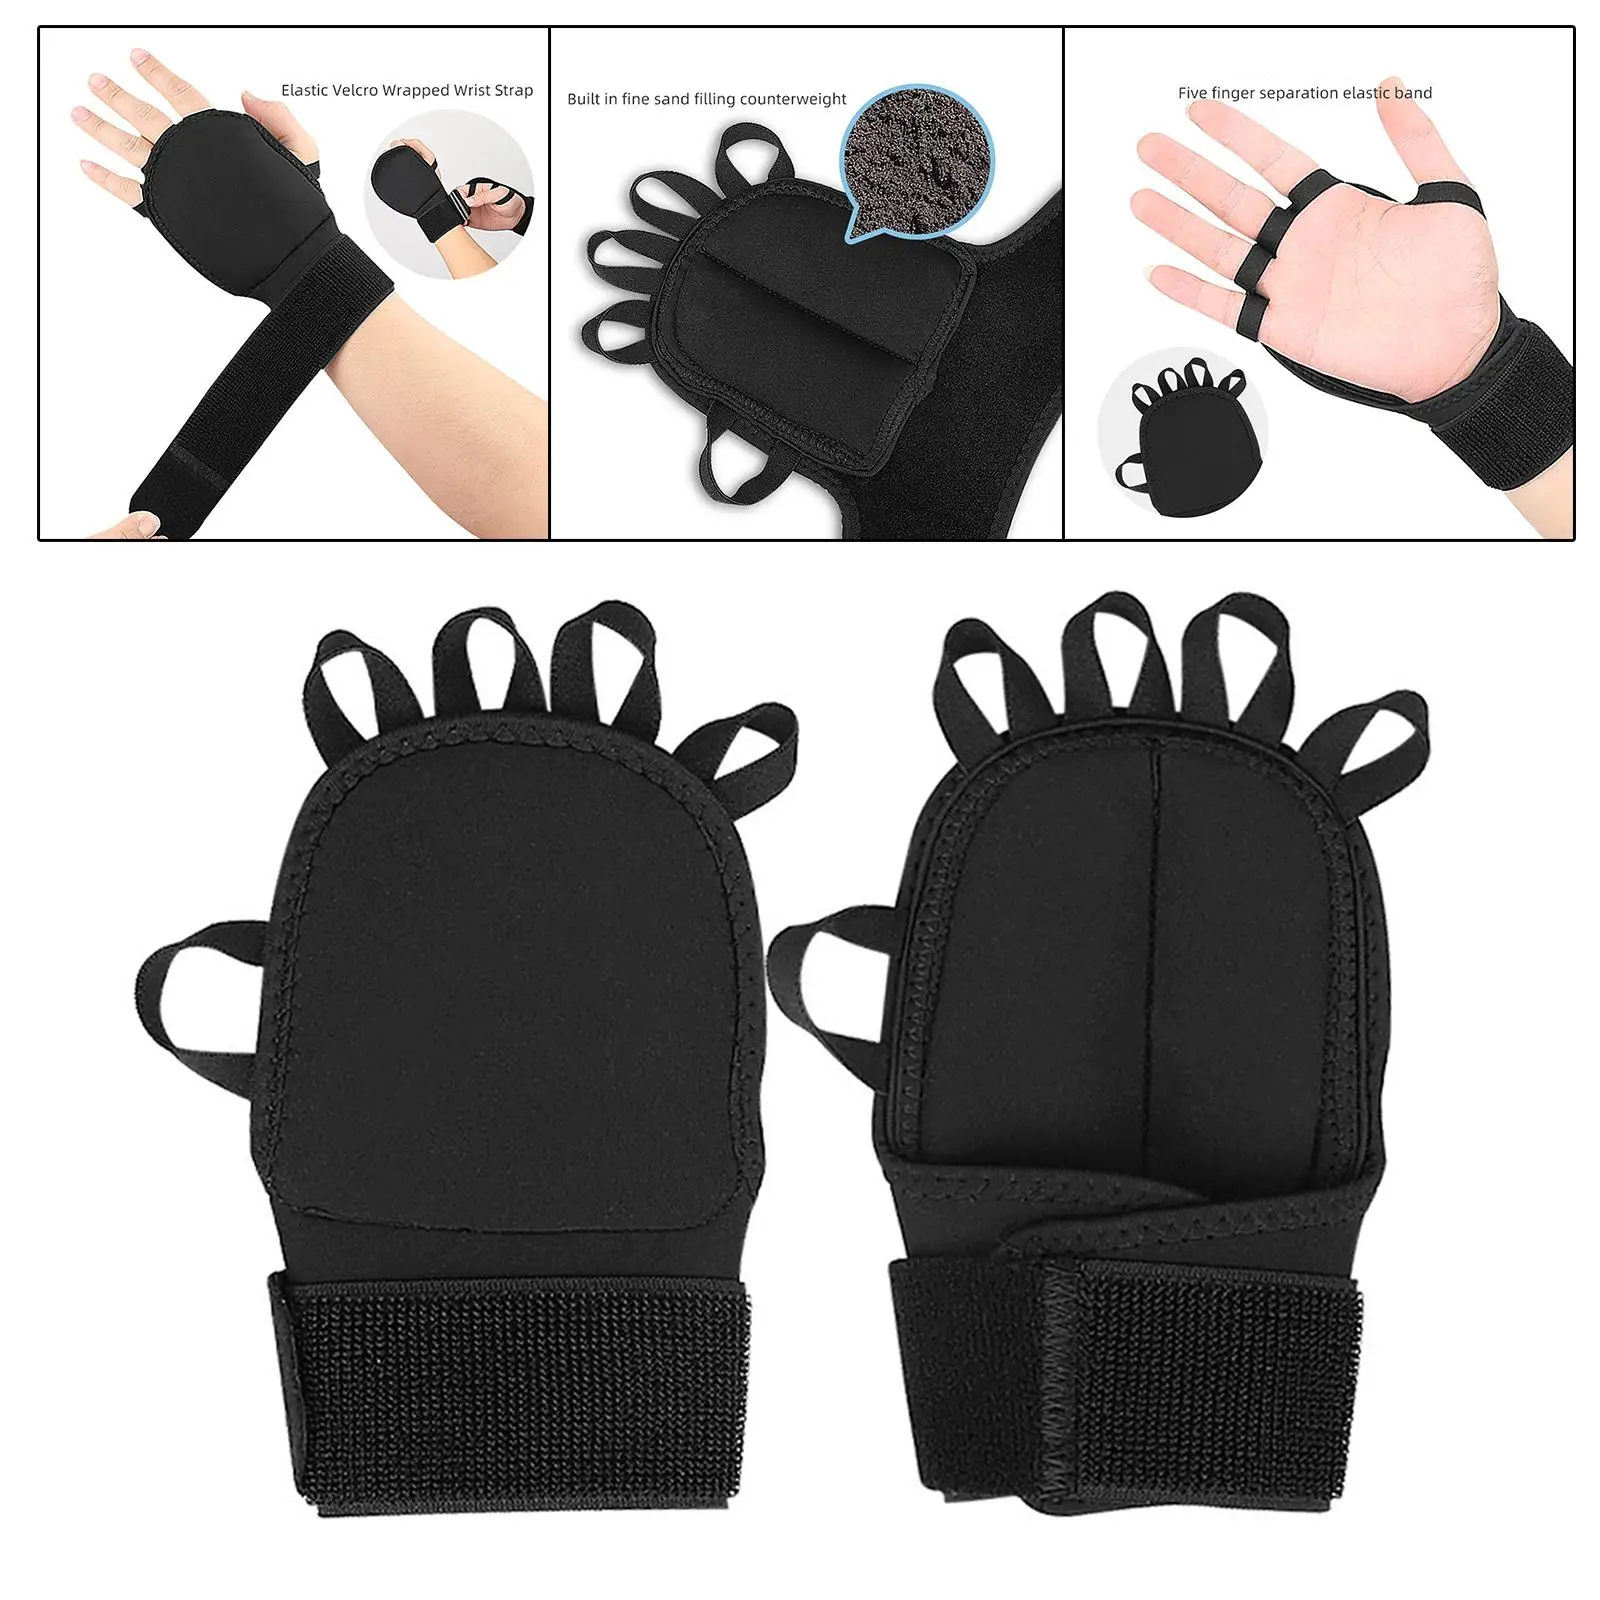 Weightlifting Gloves Mitts Palm Protection Workout Gloves for Deadlift Strength Training Bodybuilding Dumbbell Weight Lifting